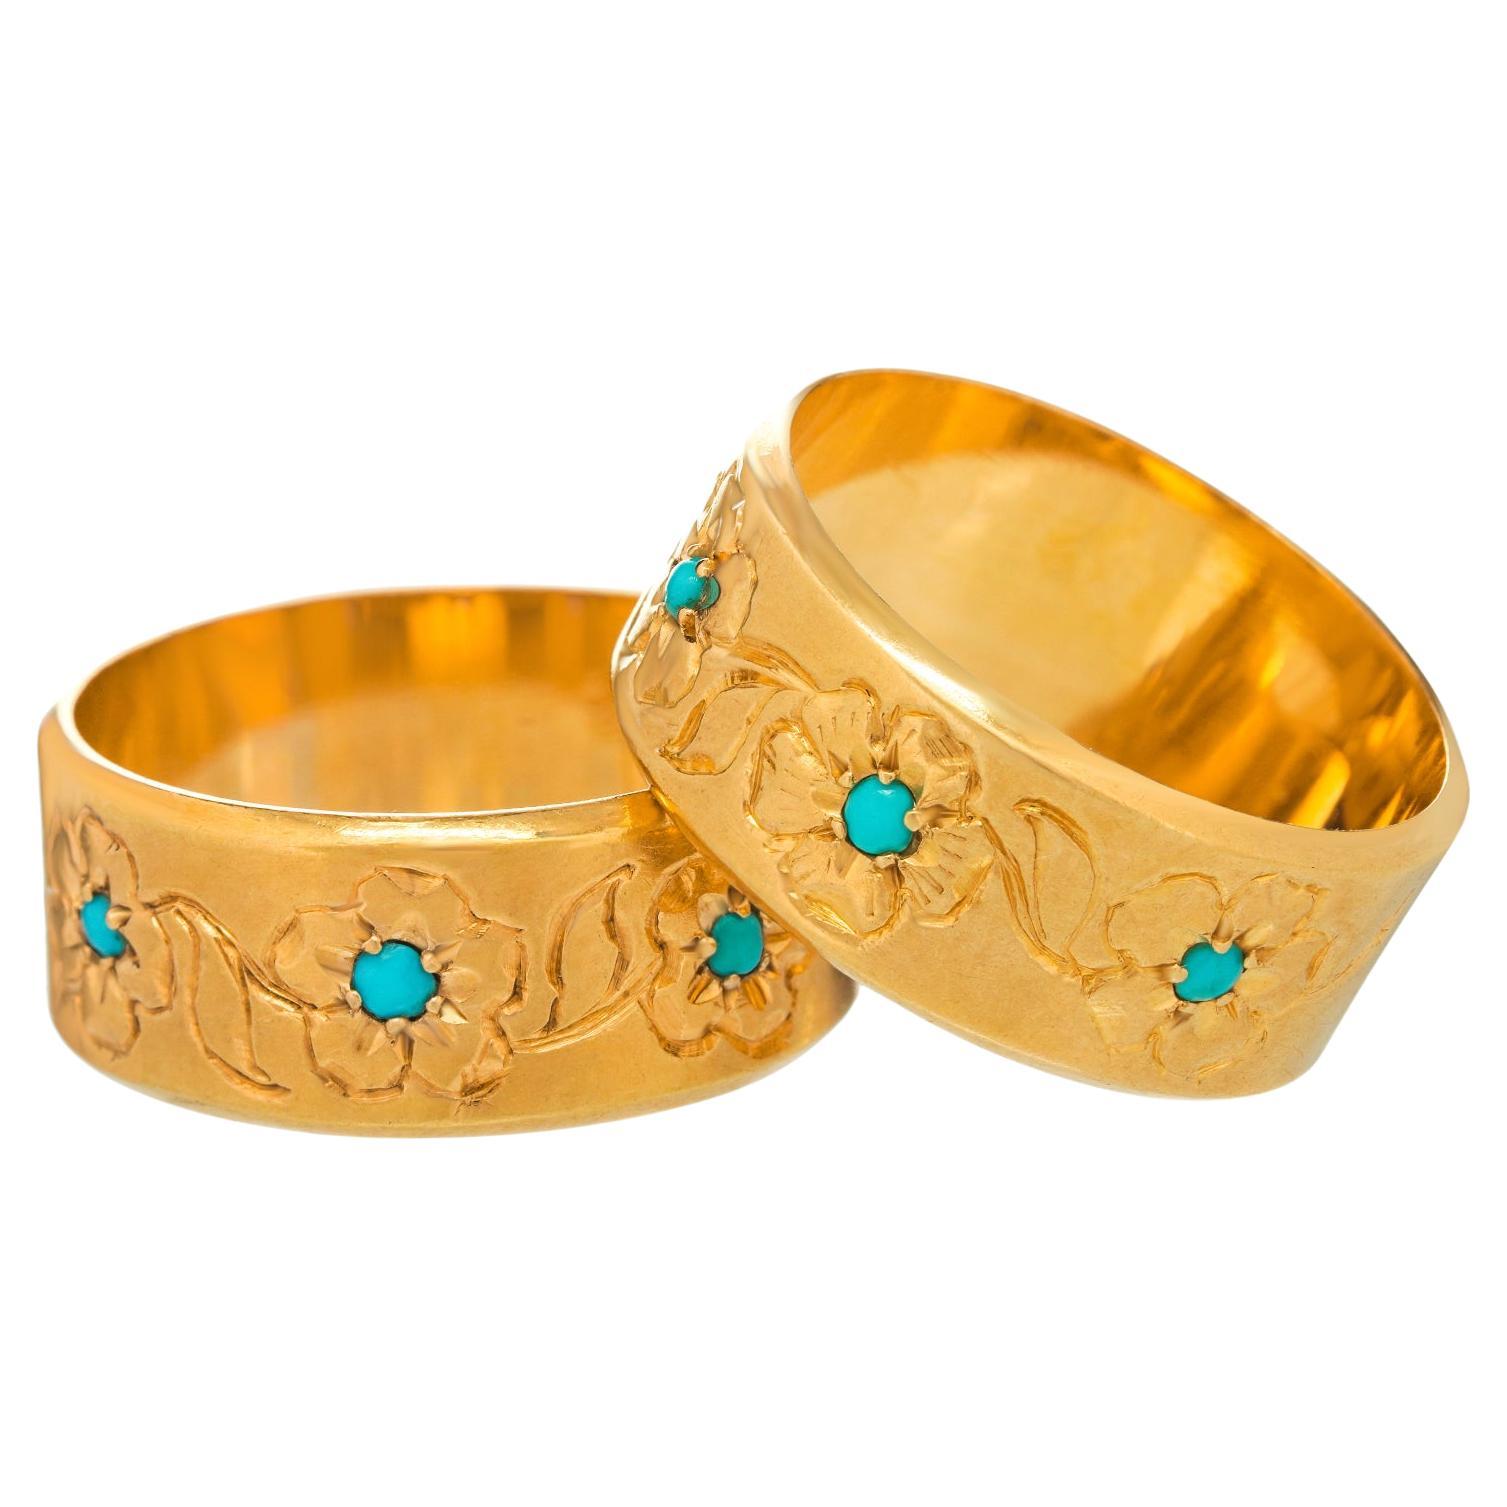 Pair of French 18k Gold and Turquoise Foliate Rings